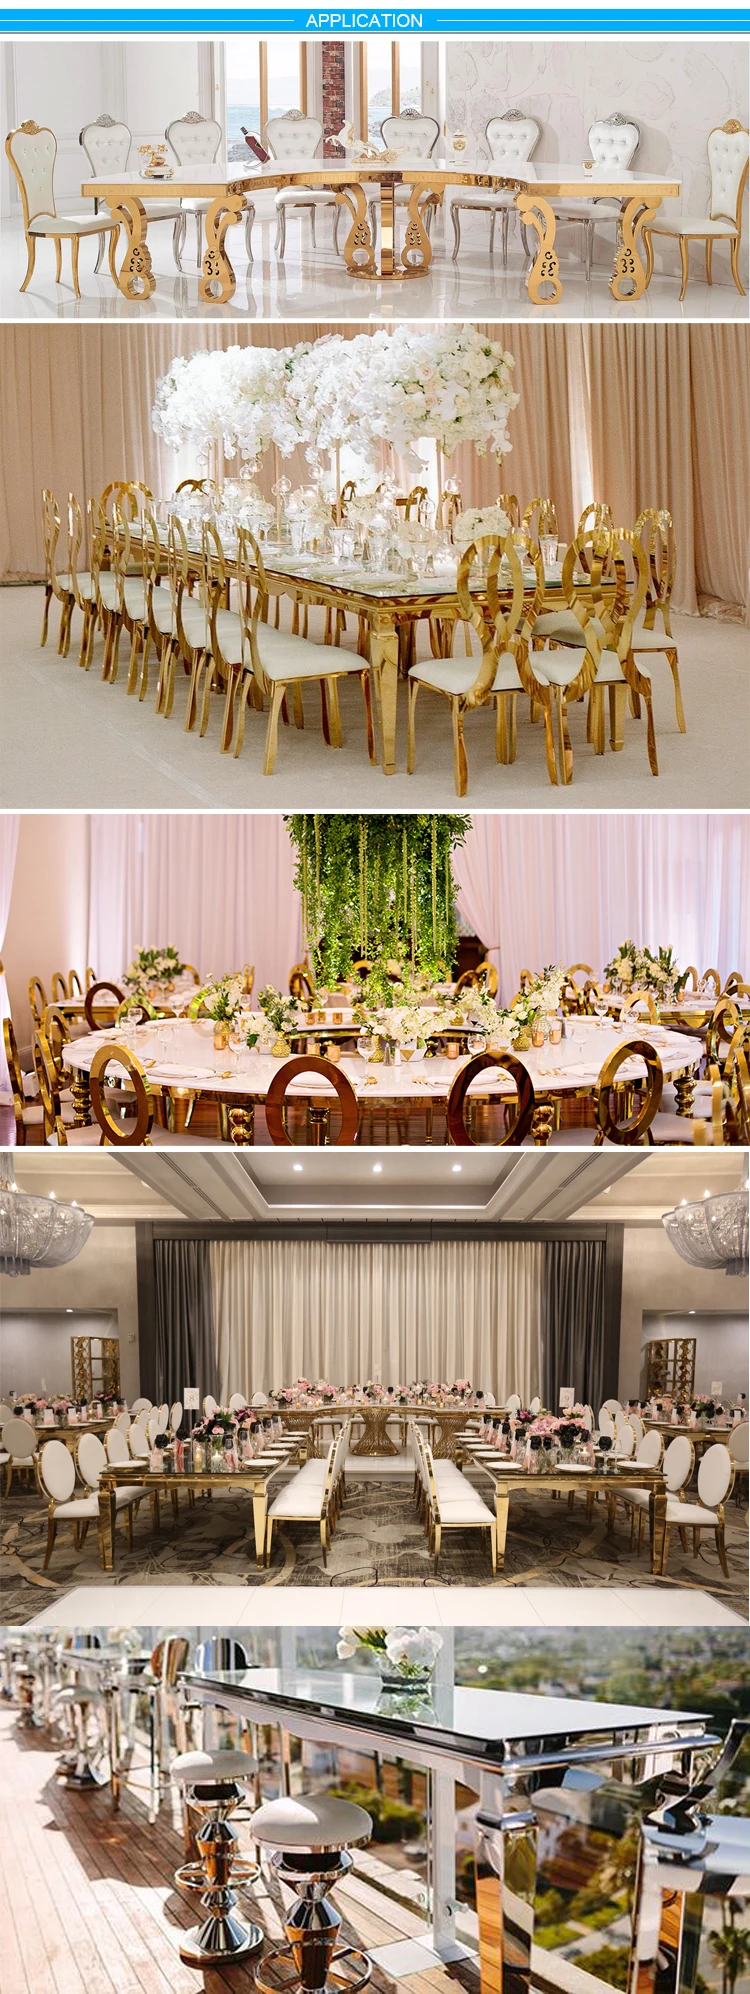 Wedding Chair Backs Gold Stainless Steel American Wedding Chairs